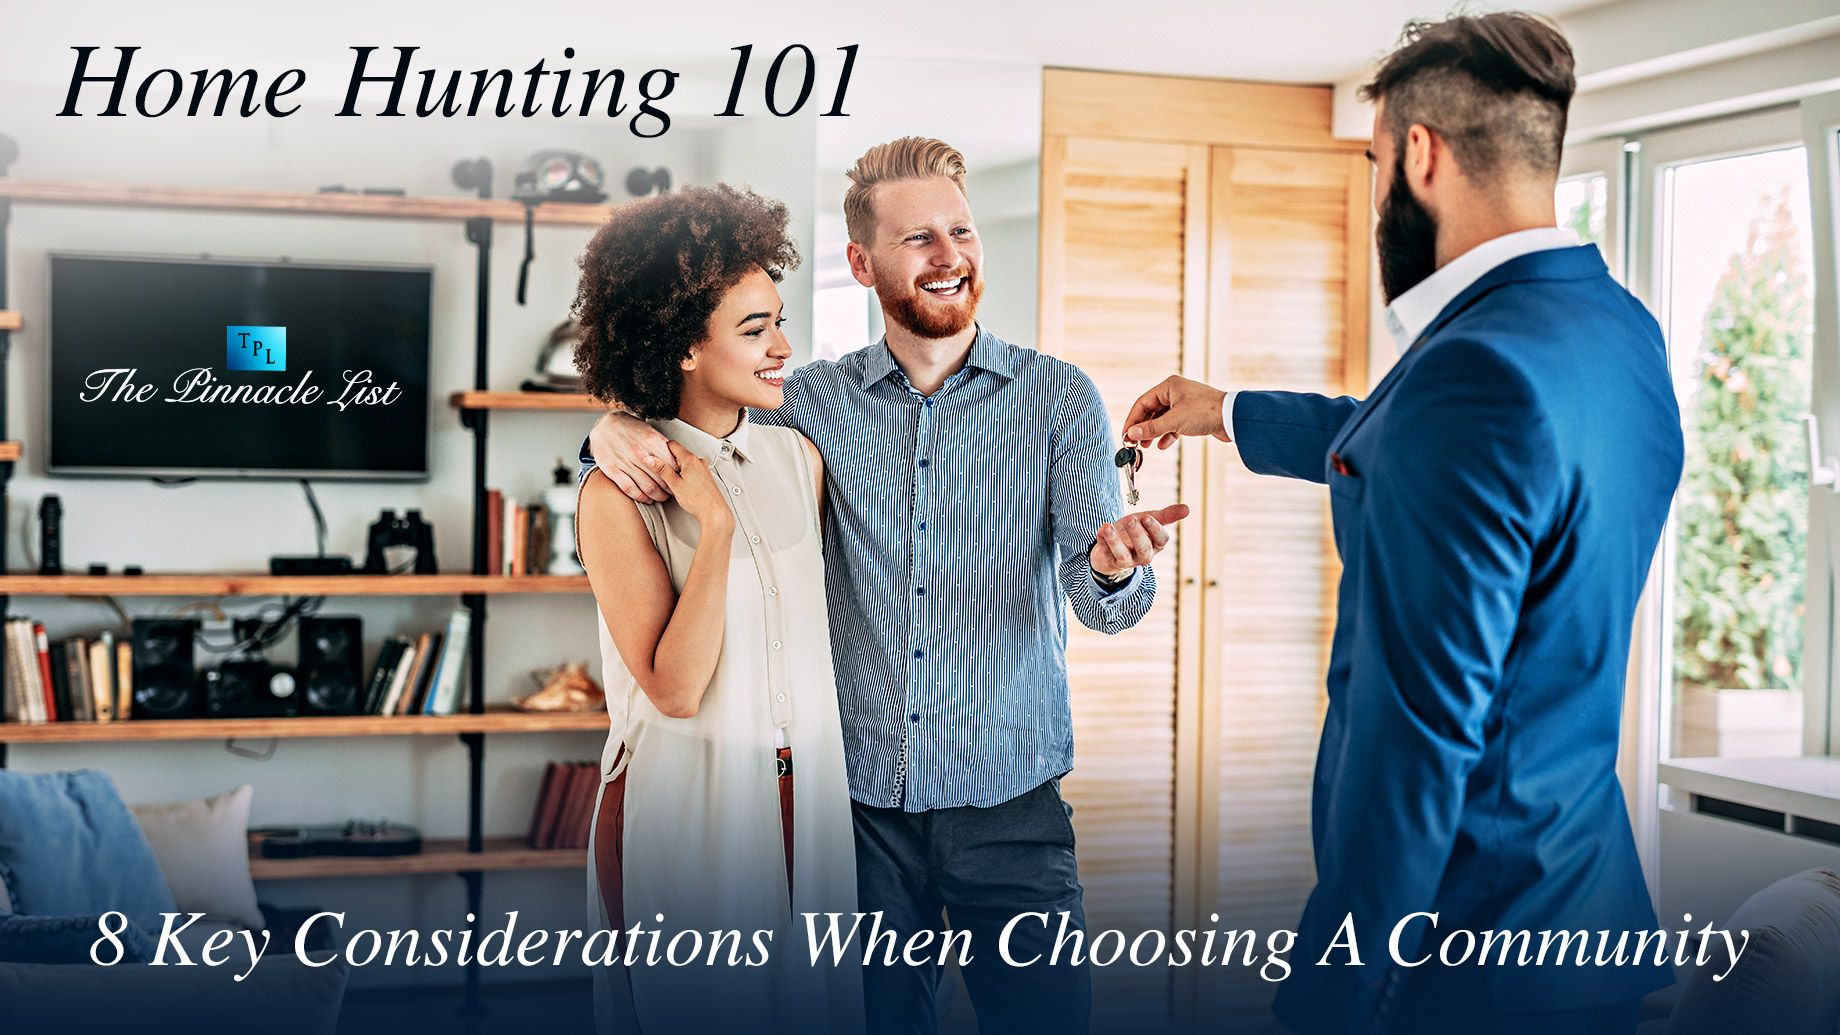 Home Hunting 101 - 8 Key Considerations When Choosing A Community